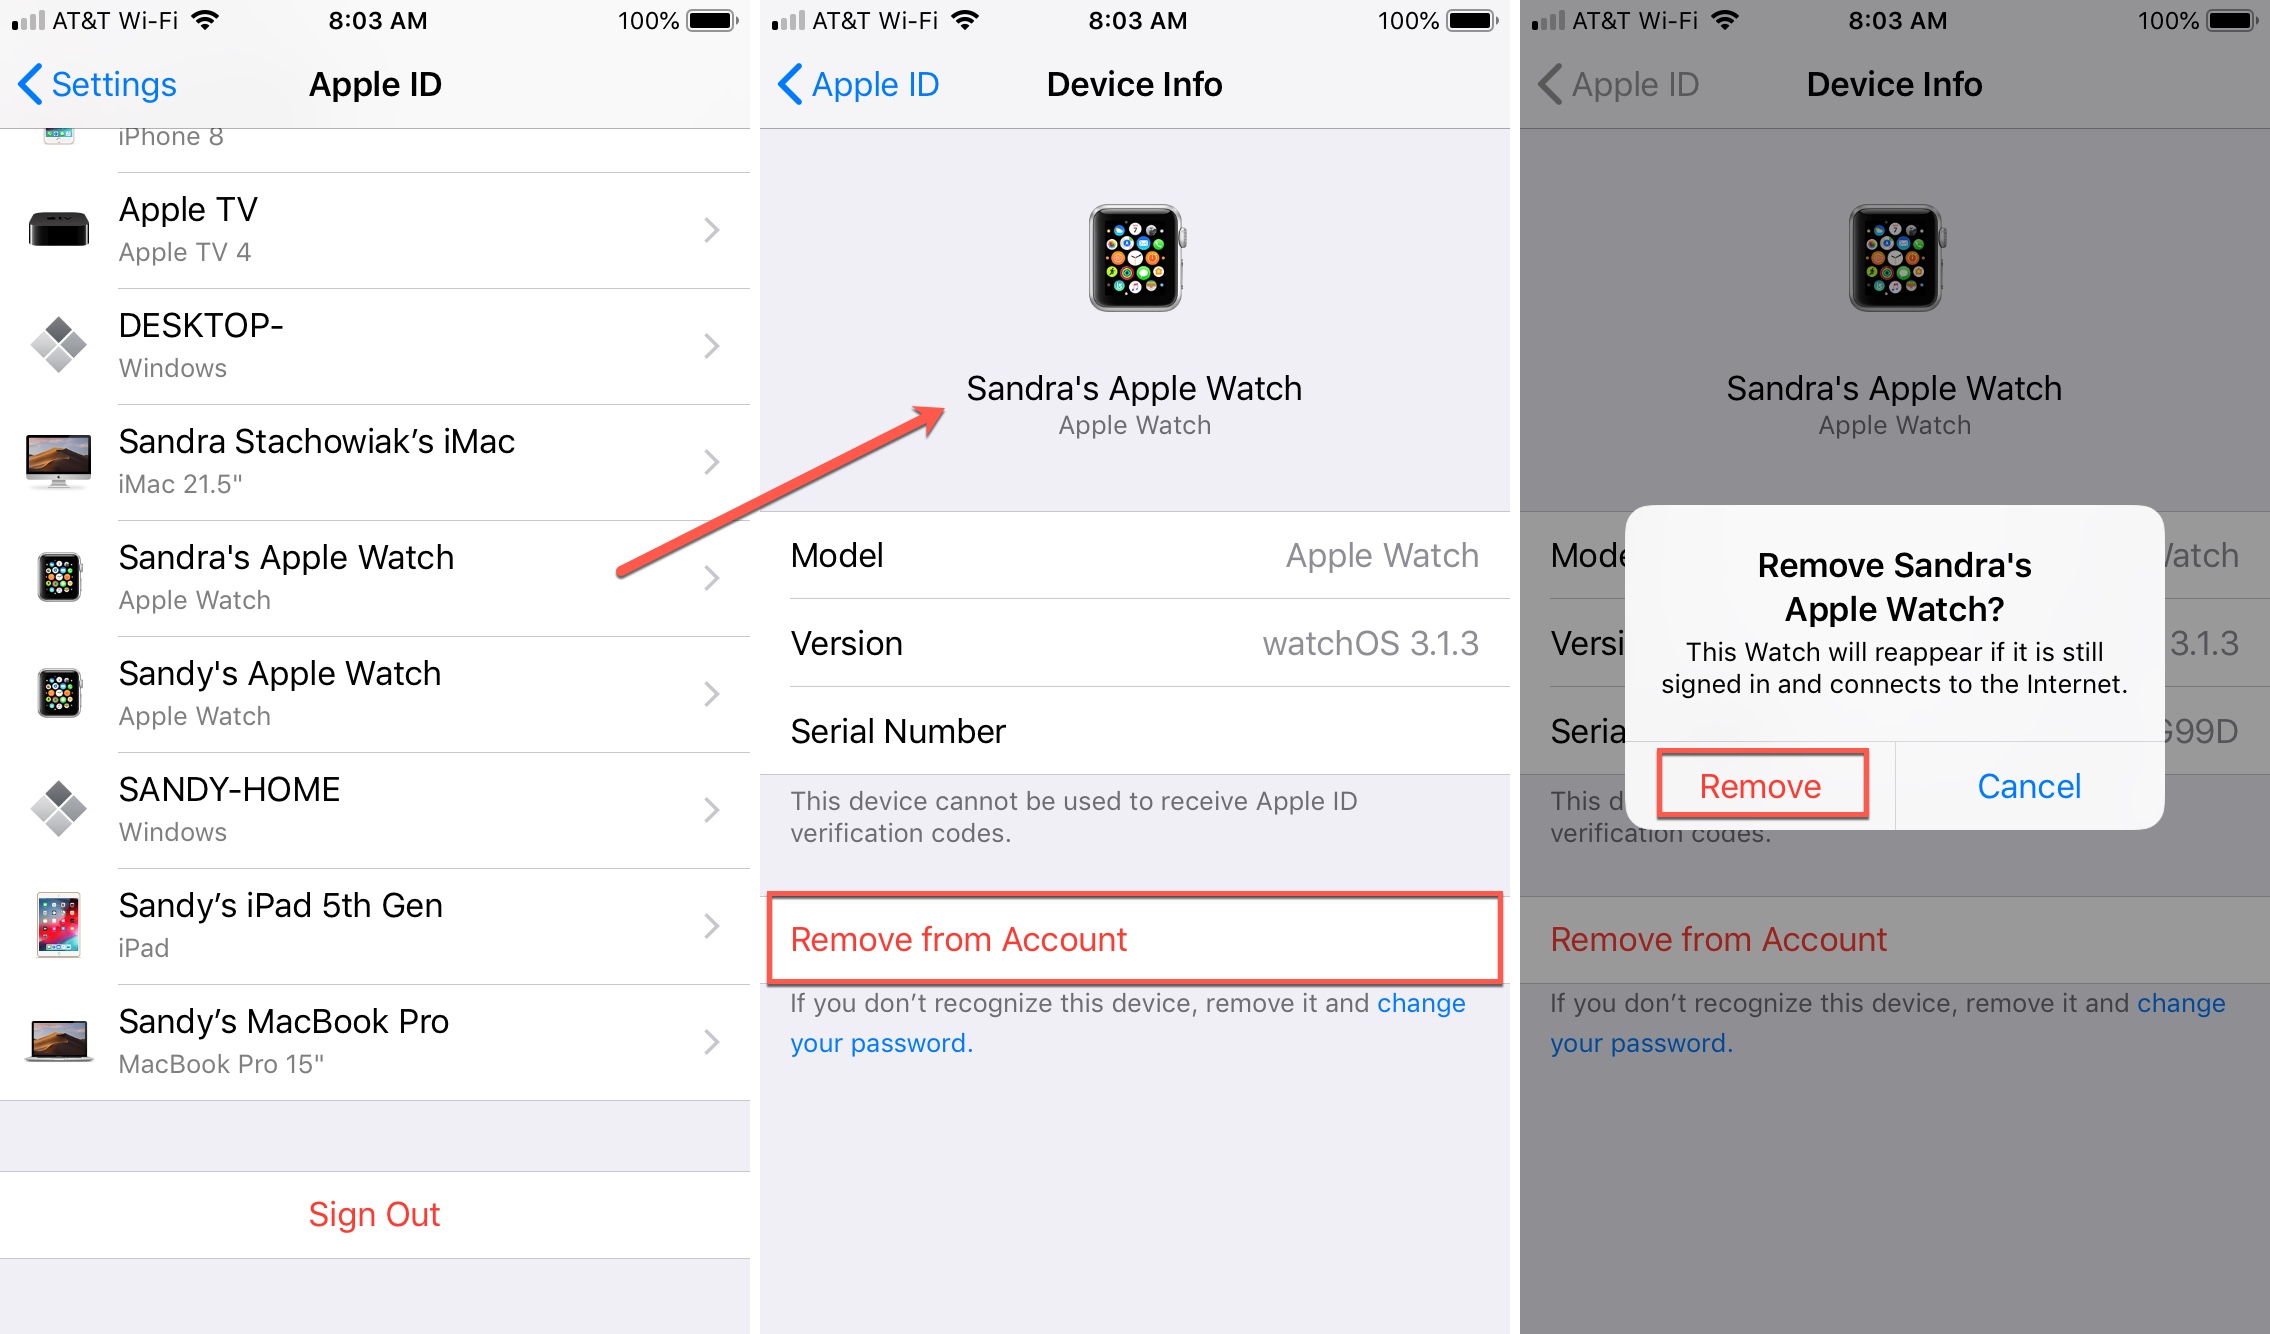 remove device from apple account on iPhone